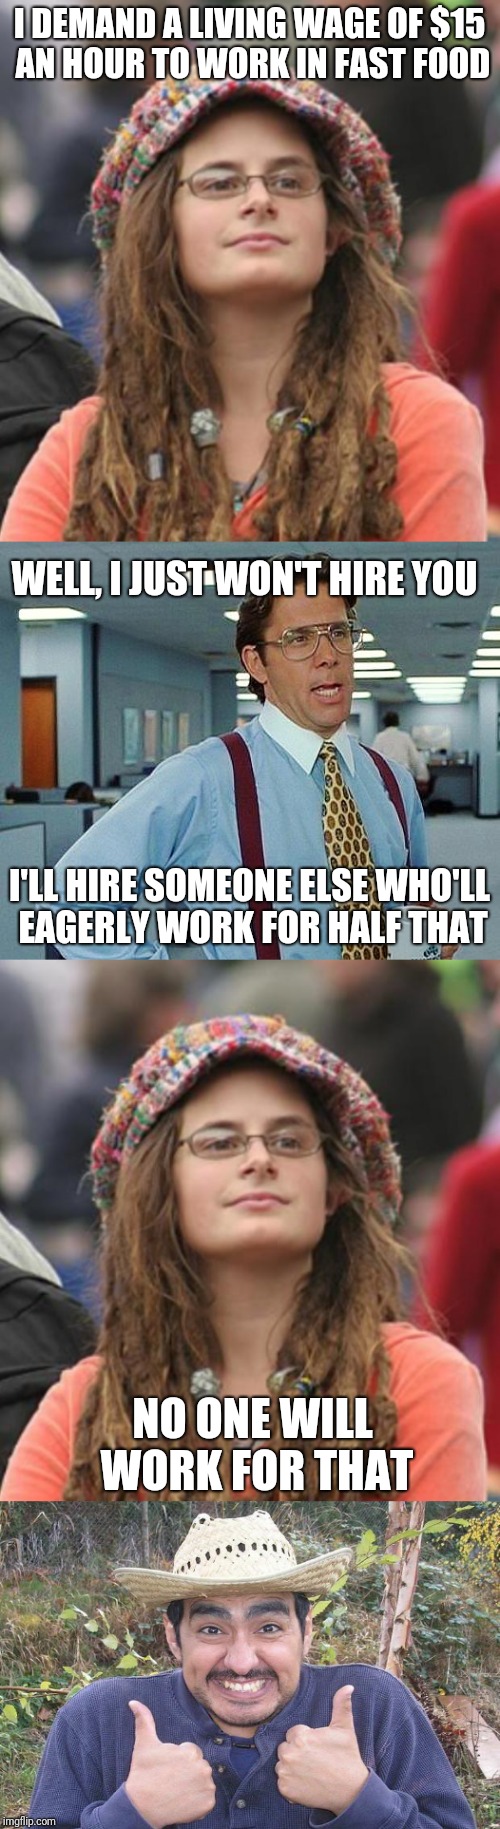 High wages and unfettered (particularly illegal) imigration are just incompatible | I DEMAND A LIVING WAGE OF $15 AN HOUR TO WORK IN FAST FOOD; WELL, I JUST WON'T HIRE YOU; I'LL HIRE SOMEONE ELSE WHO'LL EAGERLY WORK FOR HALF THAT; NO ONE WILL WORK FOR THAT | image tagged in memes,college liberal,that would be great,happy mexican,mexican | made w/ Imgflip meme maker